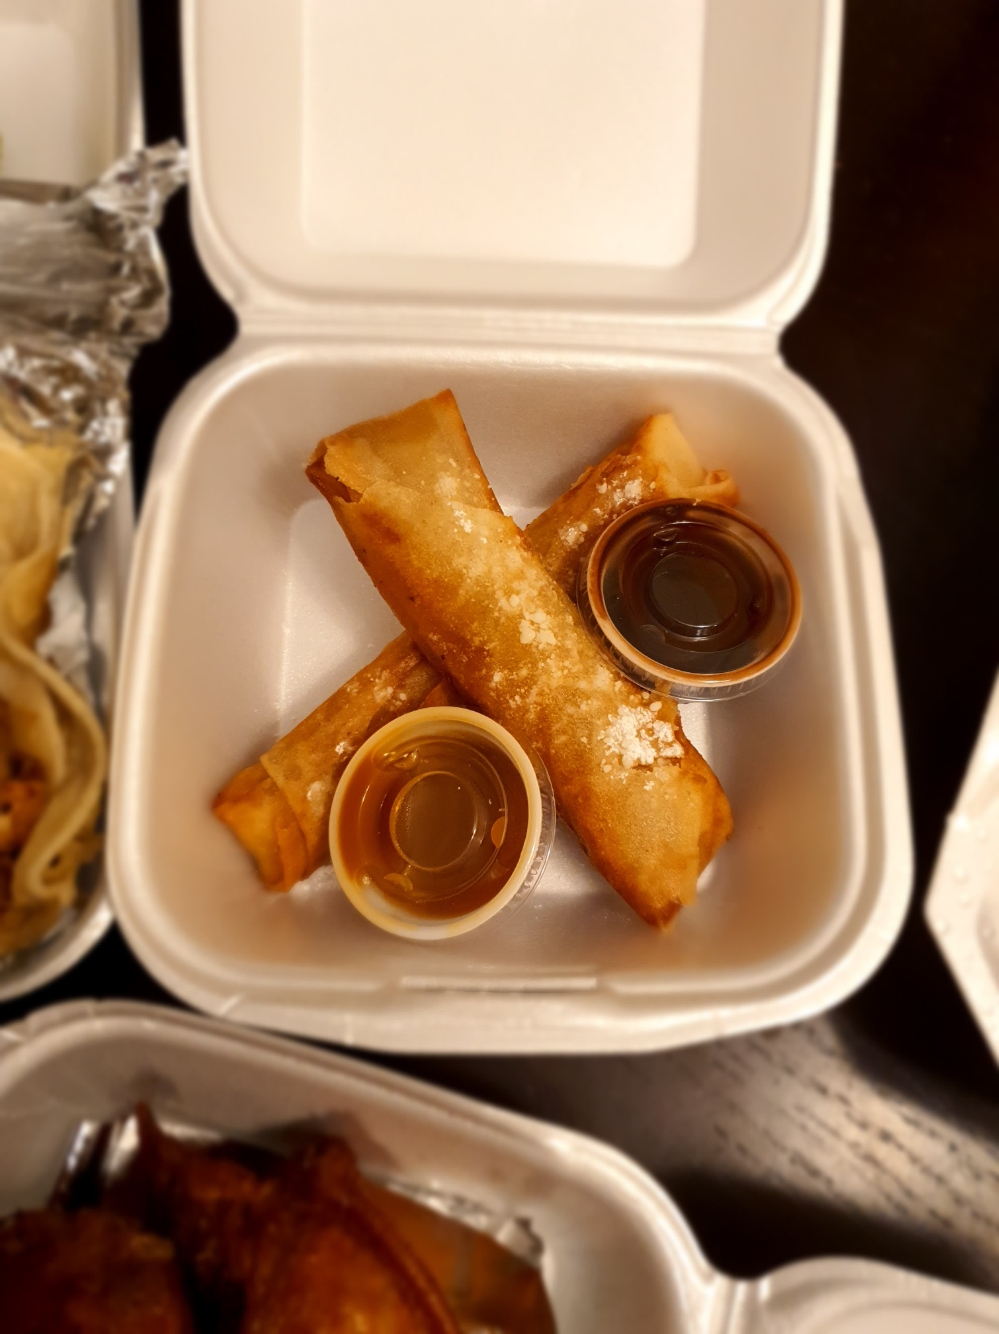 Two dessert turons sit in a takeout container with two dipping sauces. Photo by Da Yeon Eom.